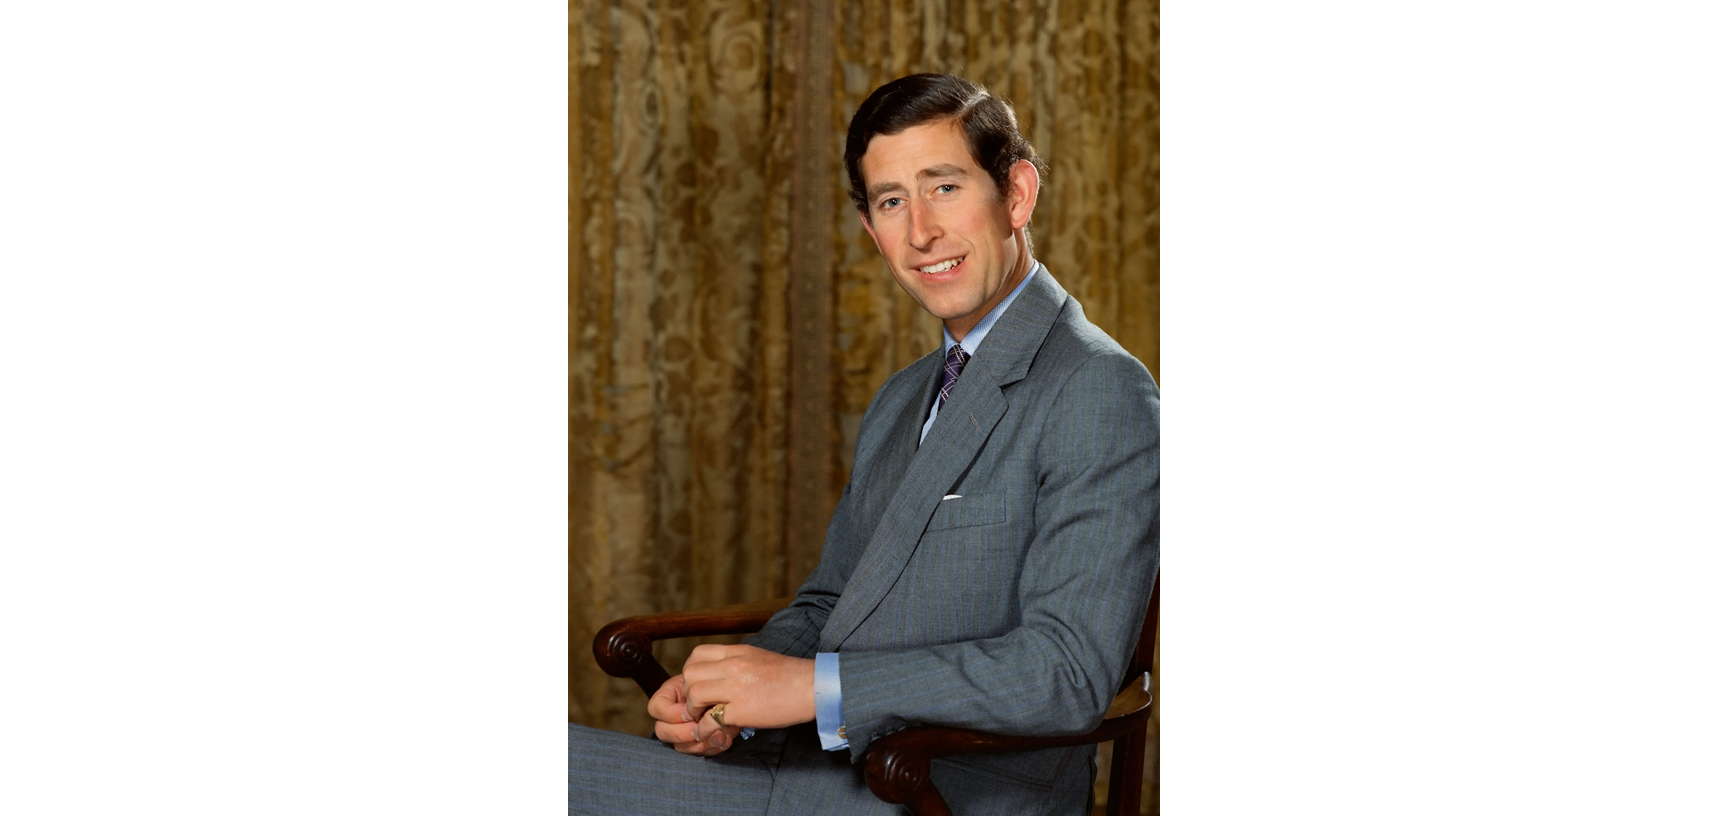 Portrait of Prince Charles - a young white male with dark hair and dressed in a grey suit, shirt & tie, sitting in a wooden chair looking straight at the camera